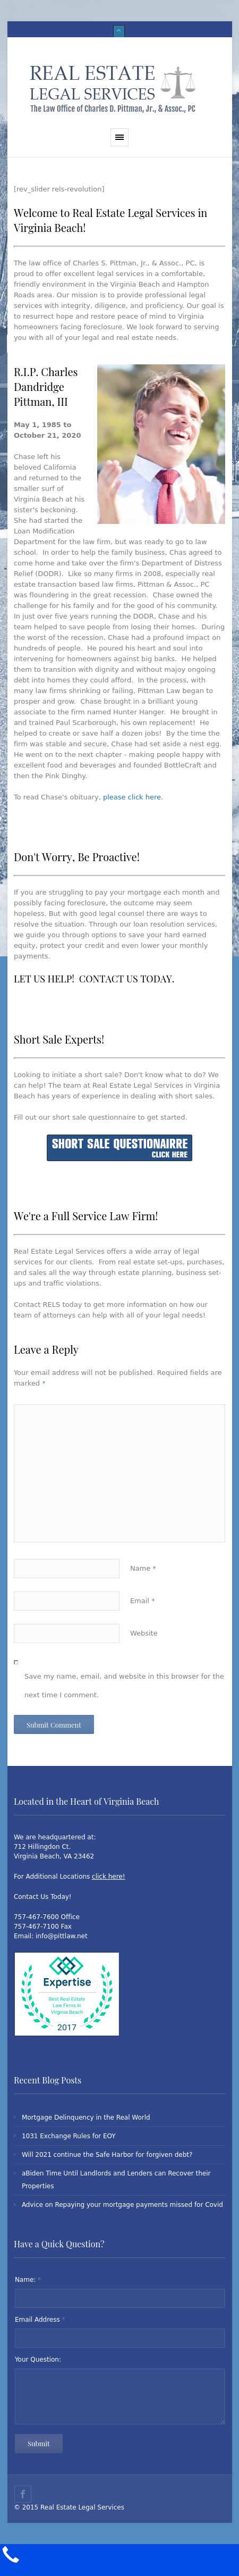 Real Estate Legal Services - Virginia Beach VA Lawyers